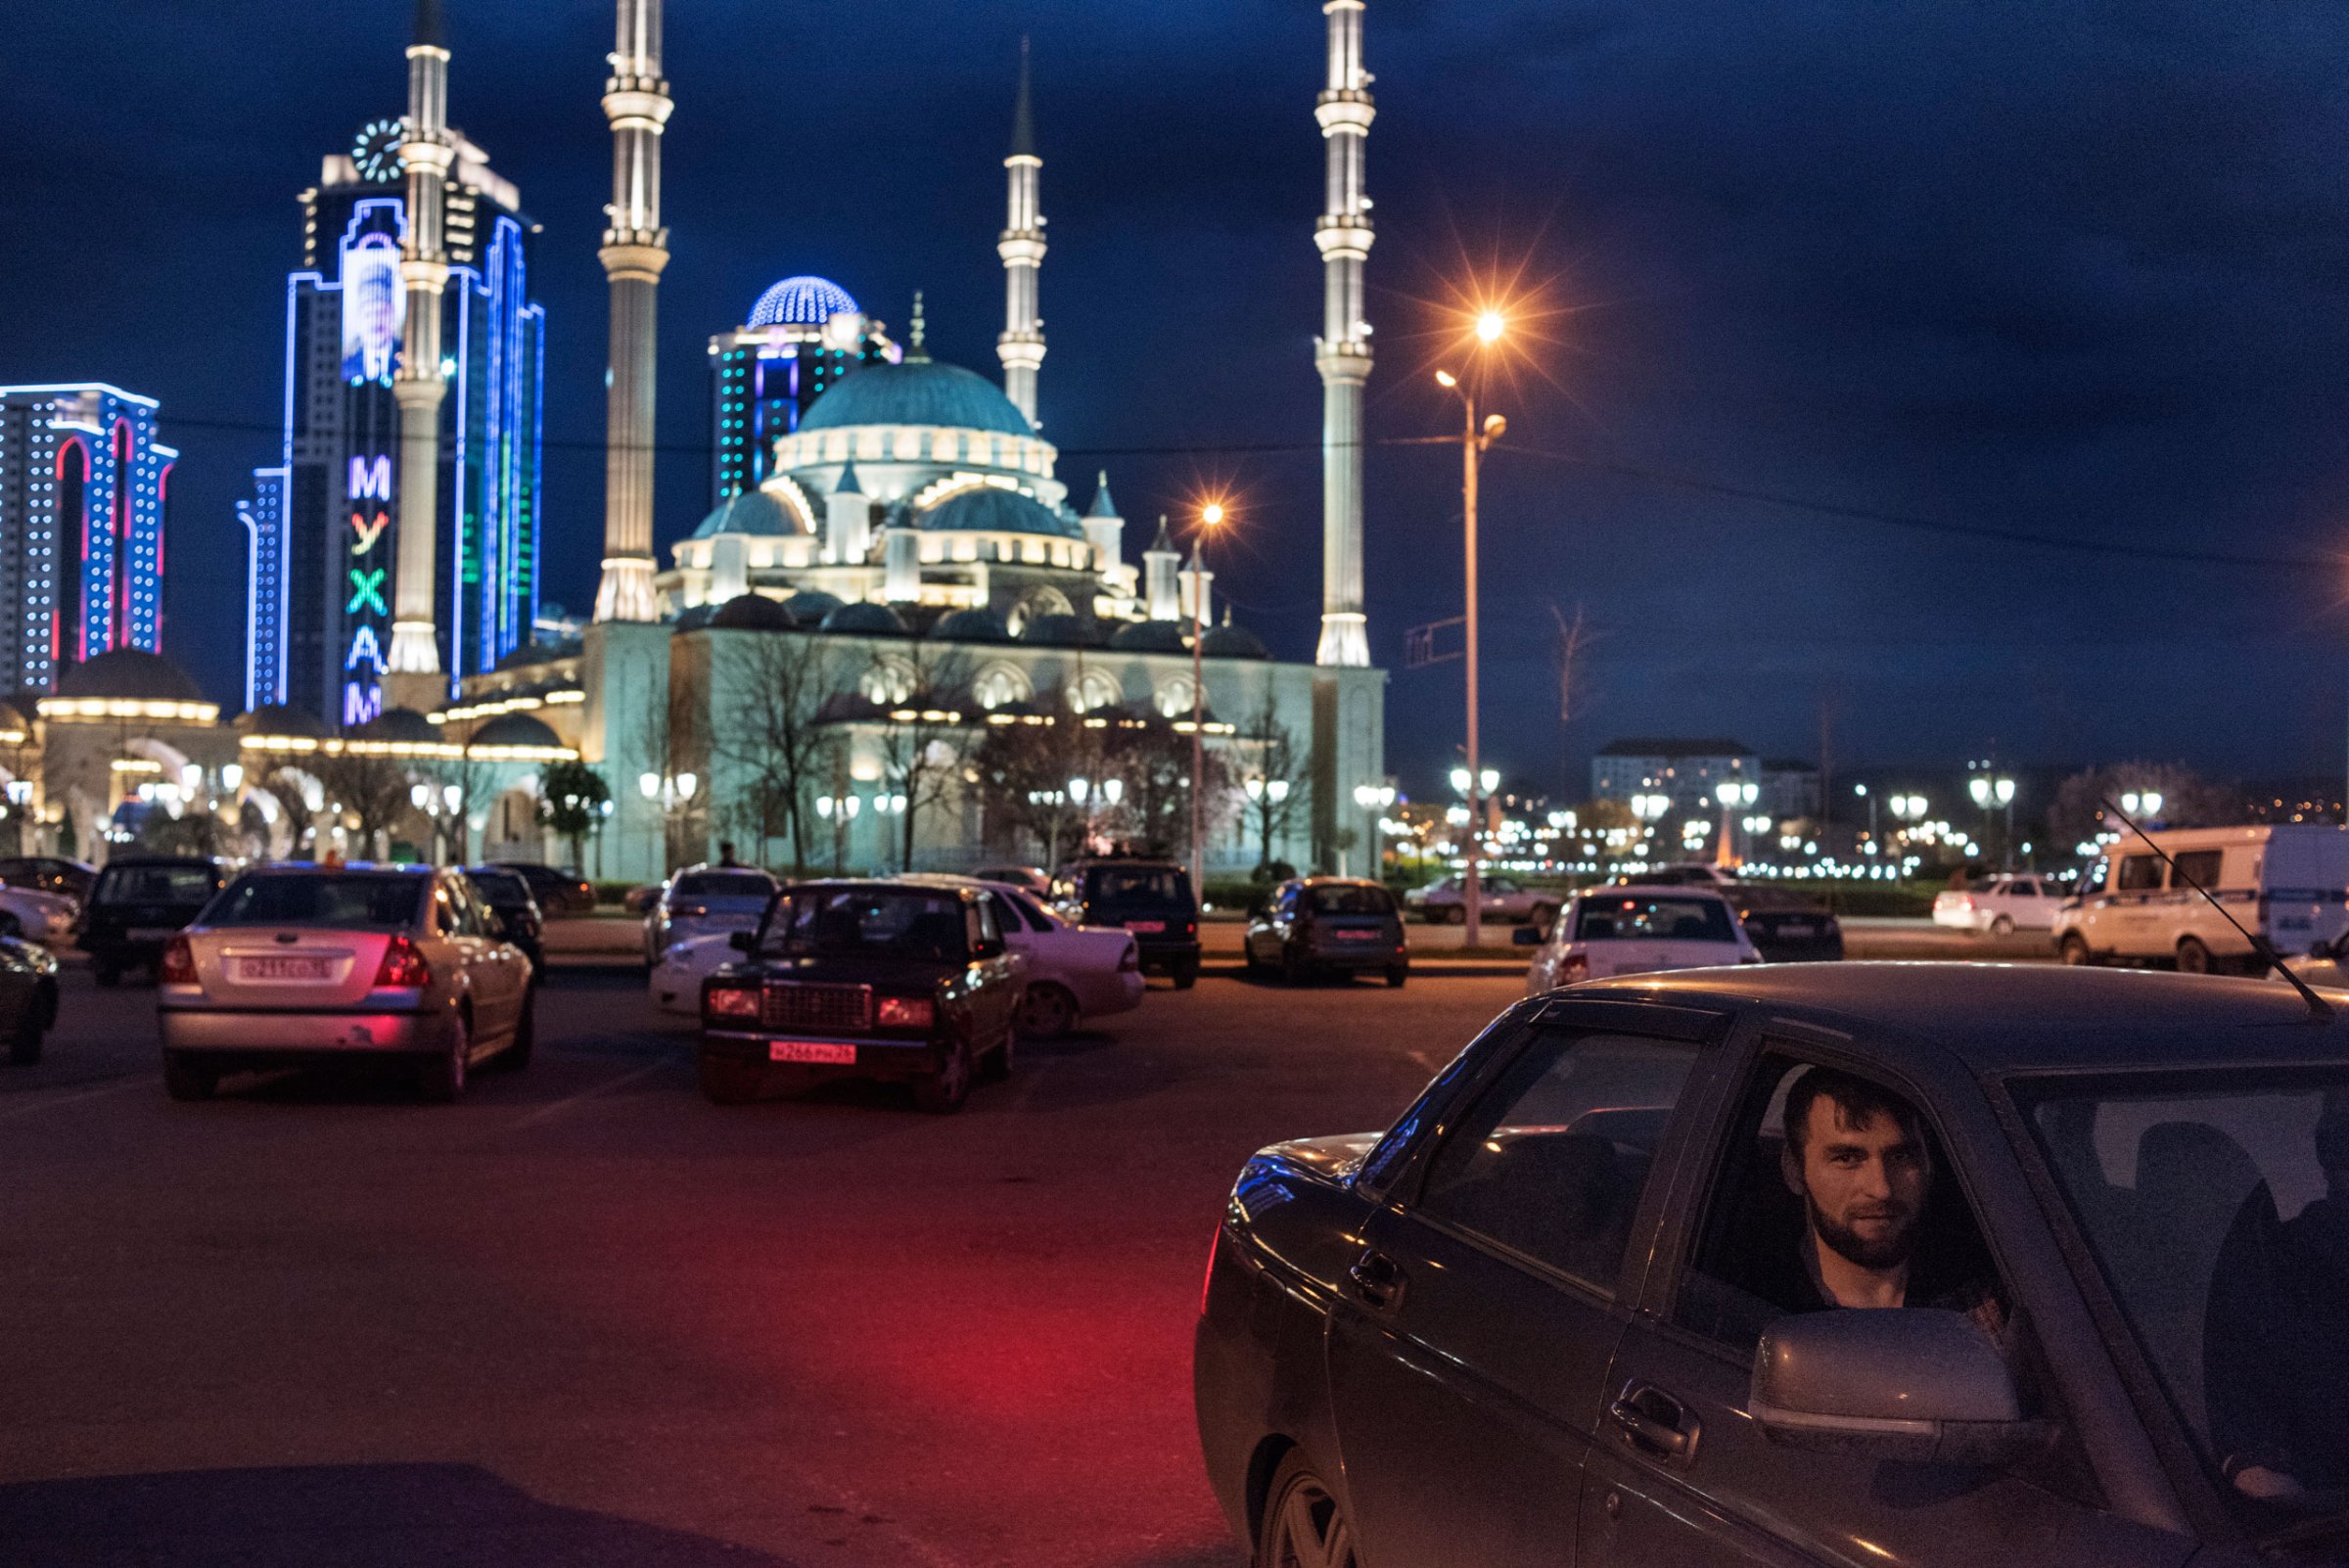 Worshipers leave evening prayer at the Heart of Chechnya Mosque in Grozny, April 17, 2015.Yuri kozyrev—NOOR for TIME